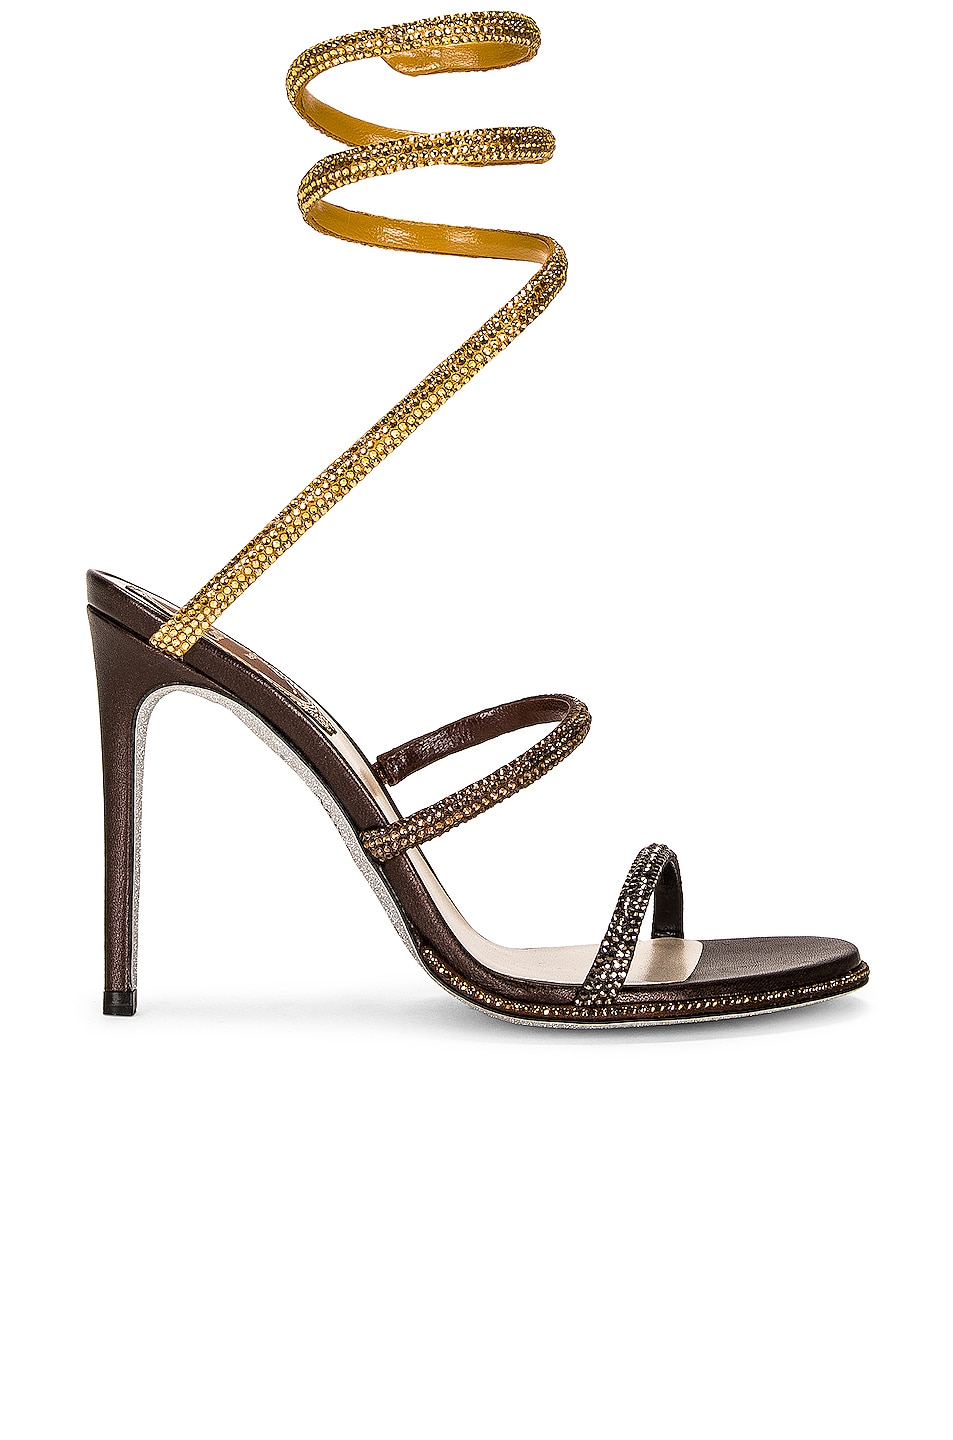 Image 1 of RENE CAOVILLA Cleo 105mm Lace Up Sandal in Brown, Jet Nut, & Smoked Topaz